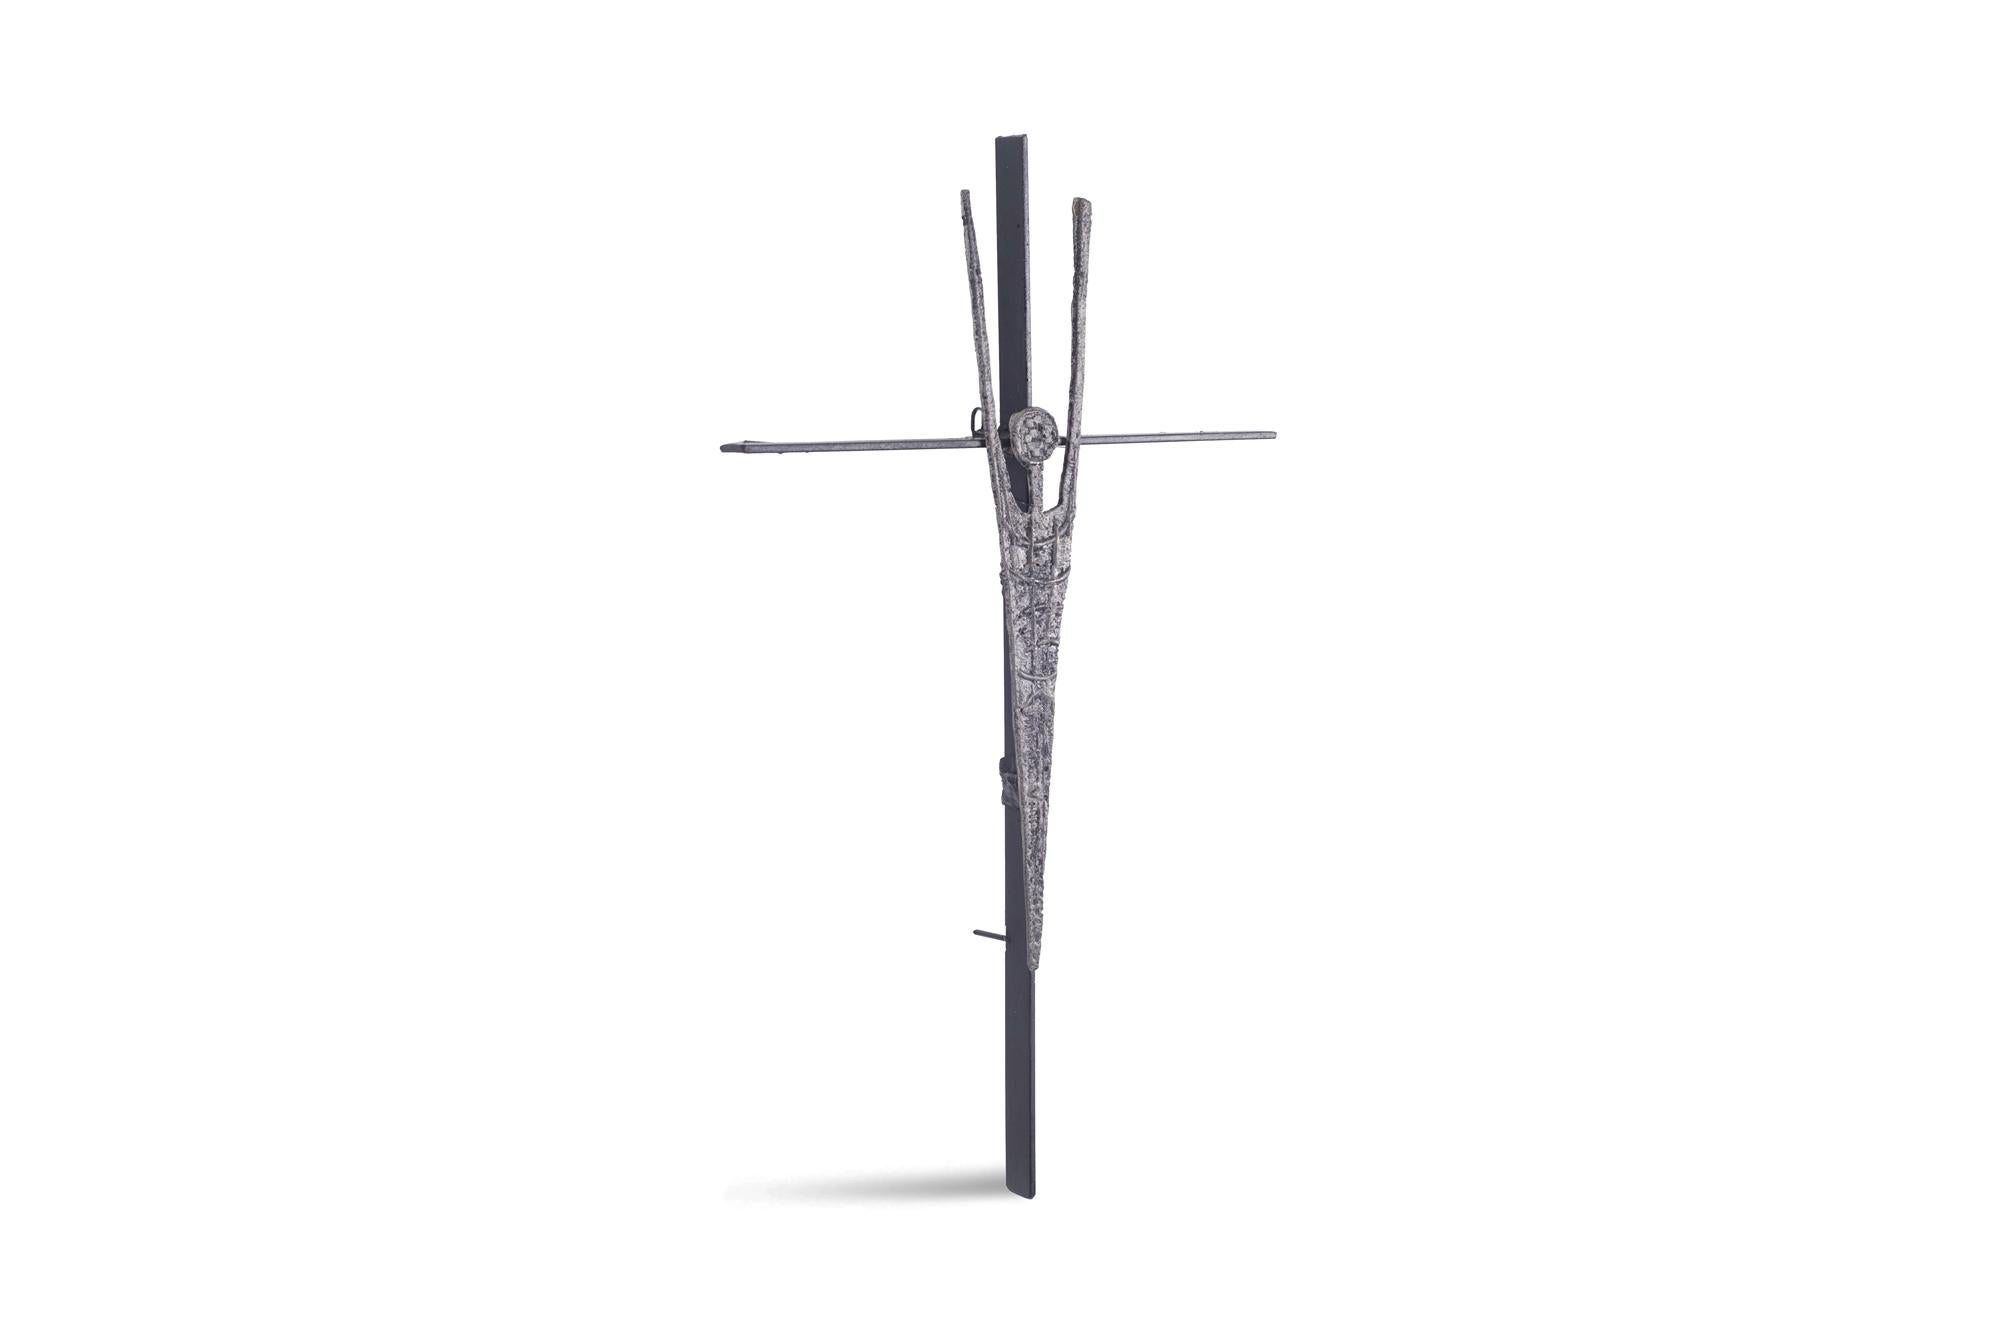 Brutalist 1960s belgian sculpture which might depict a modern version of Jesus on the cross with his hands raised.
Cast iron on black steel.
     